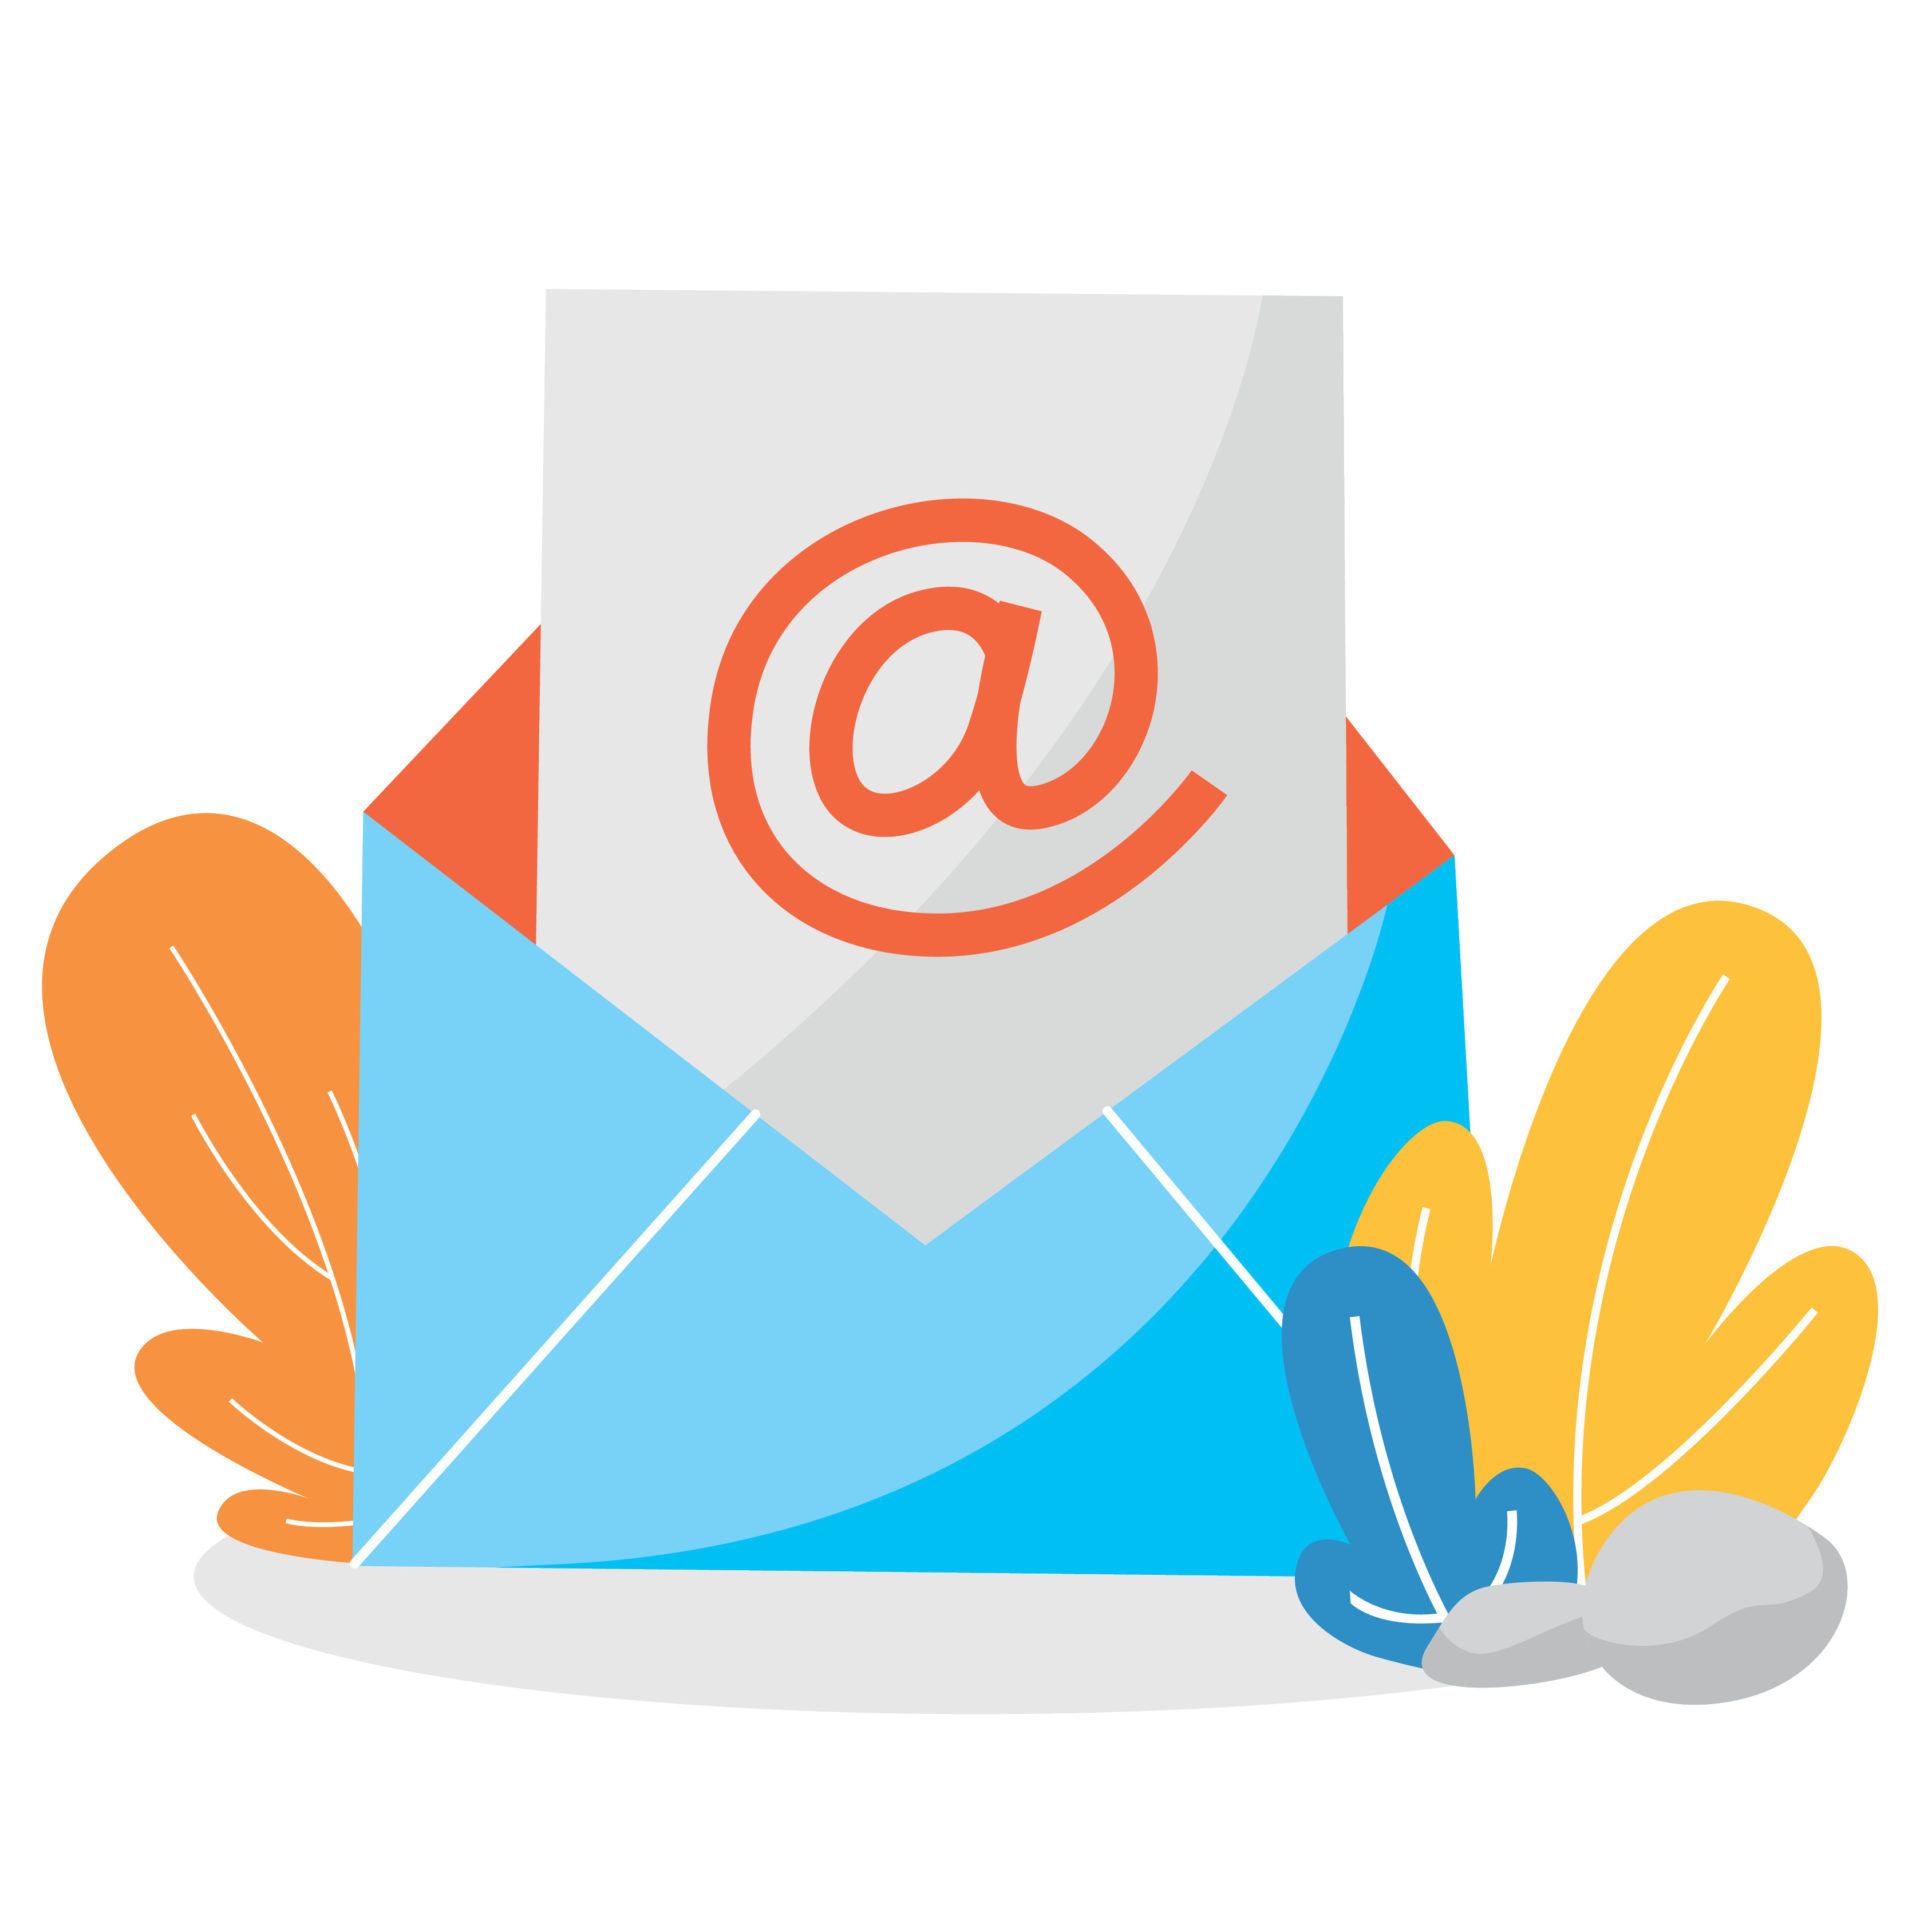 Email or mail concept